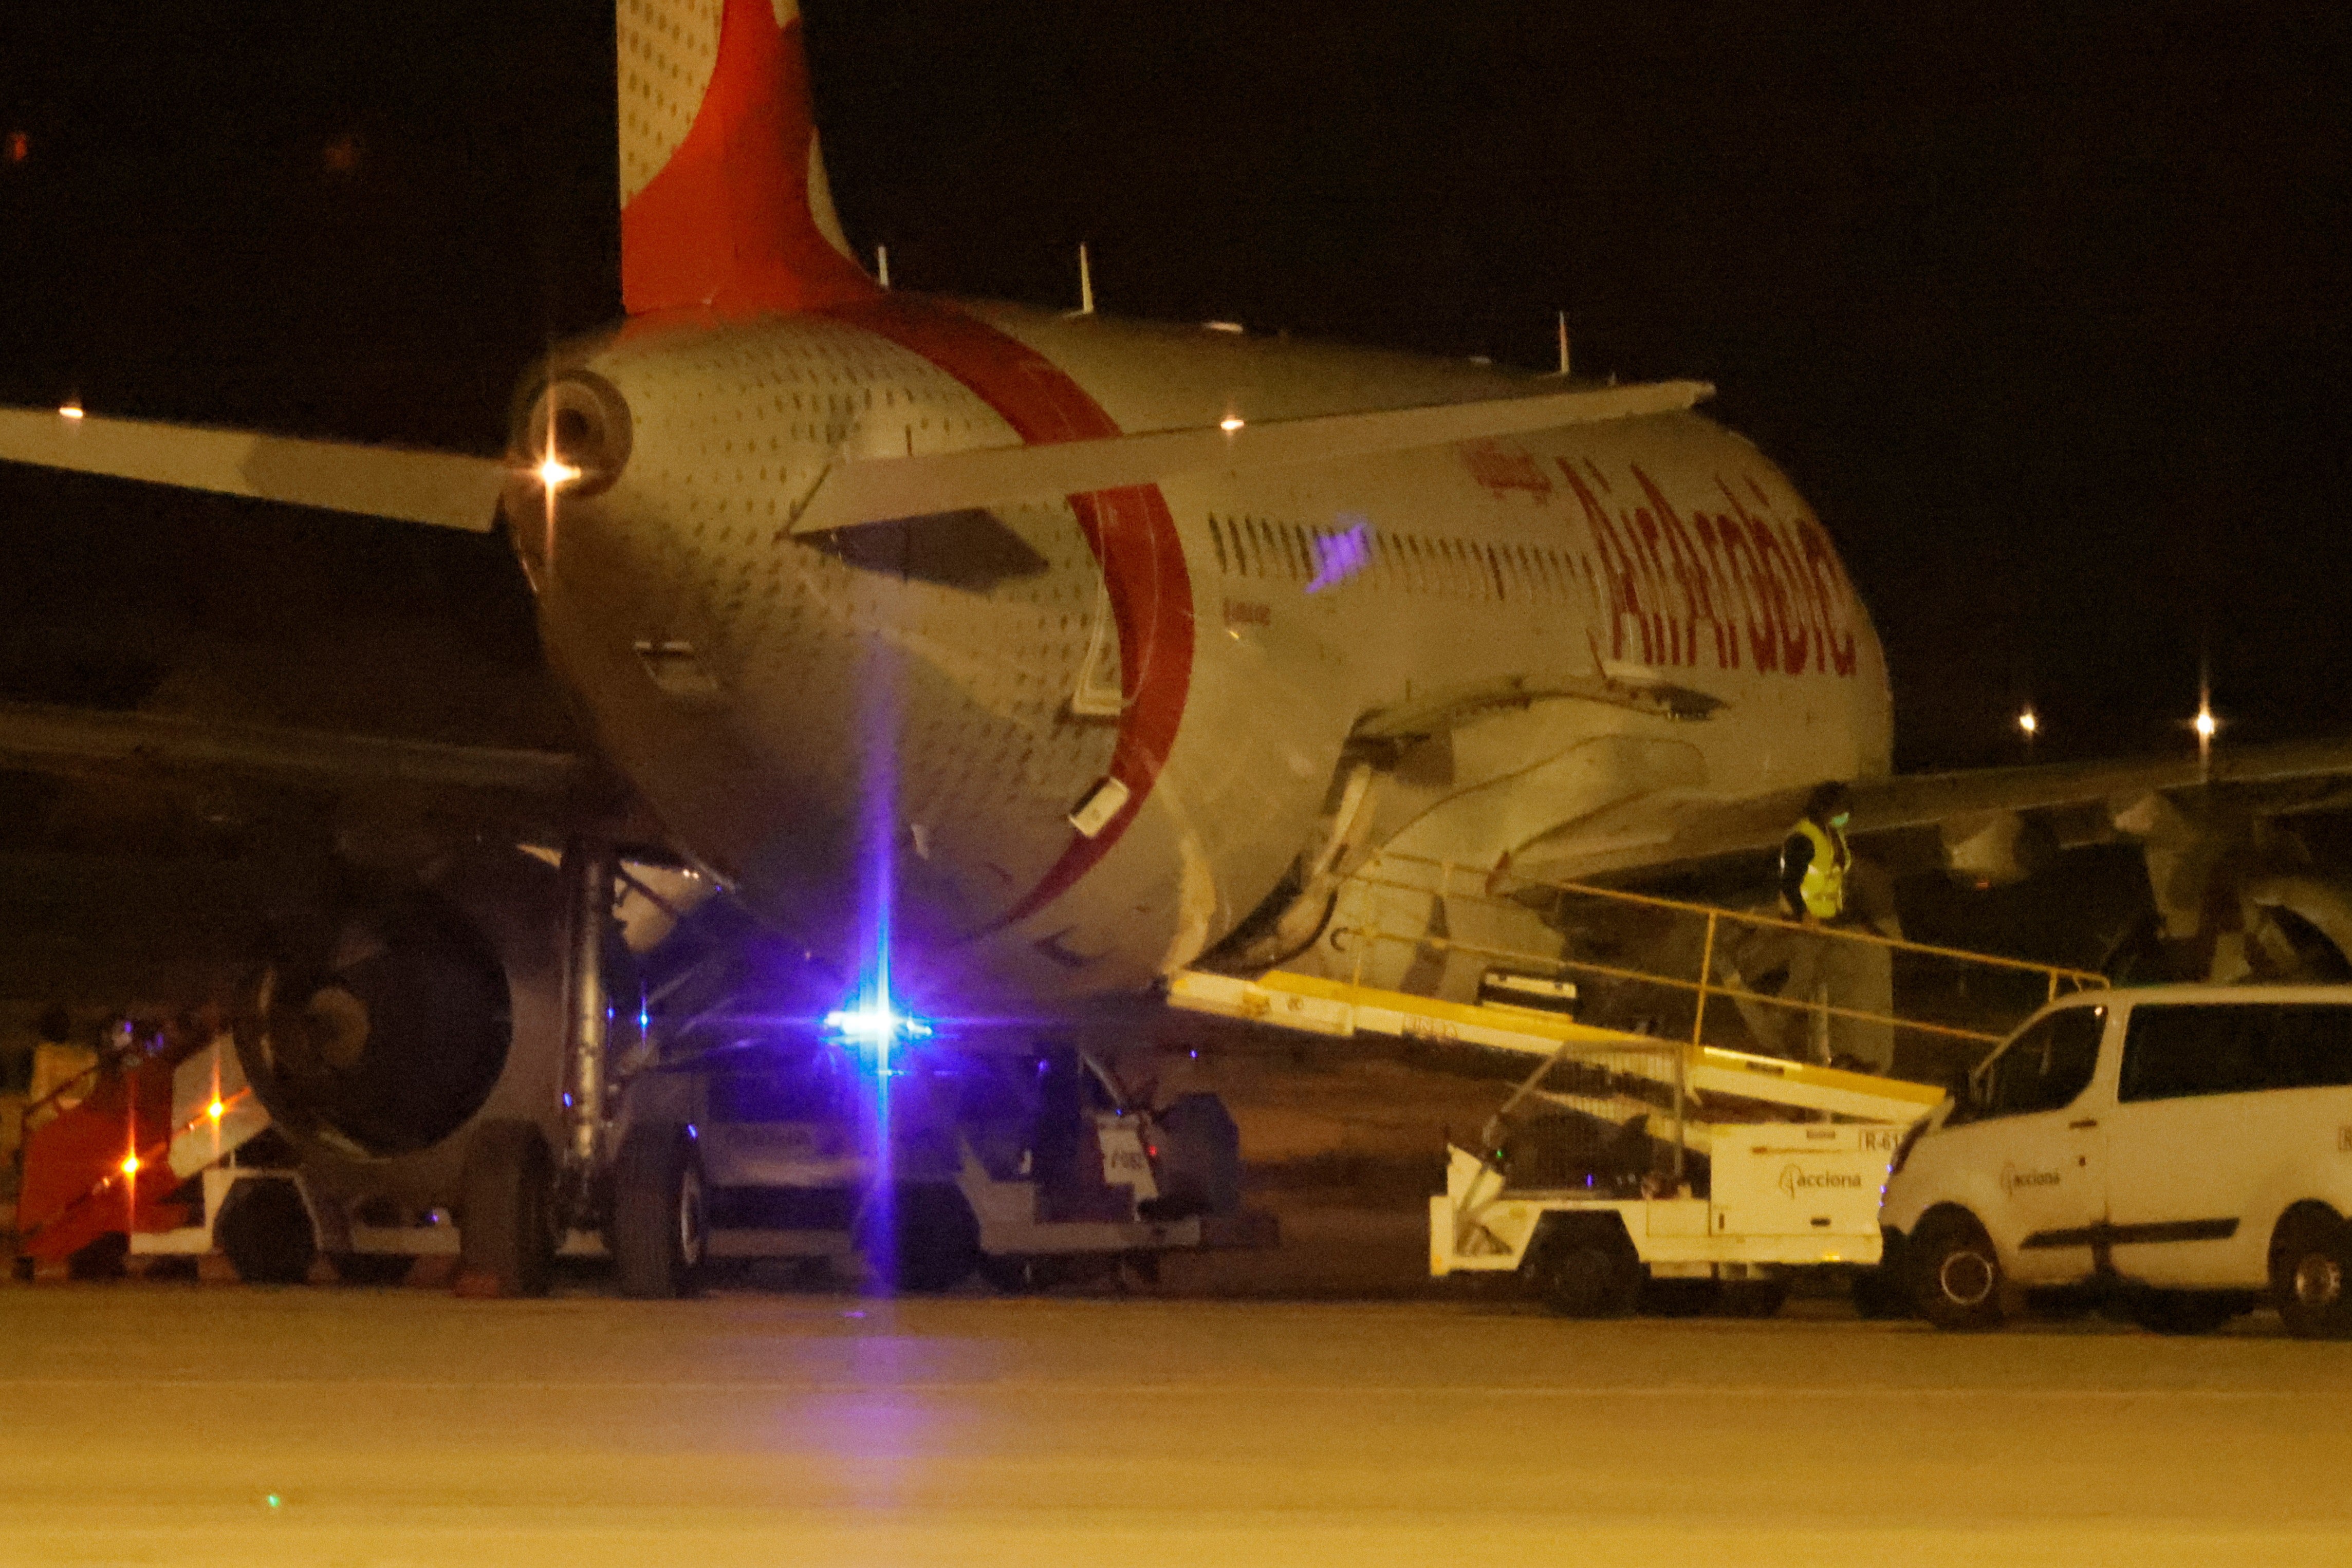 The flight diverted to Palma de Mallorca’s Airport after a passenger required medical attention.